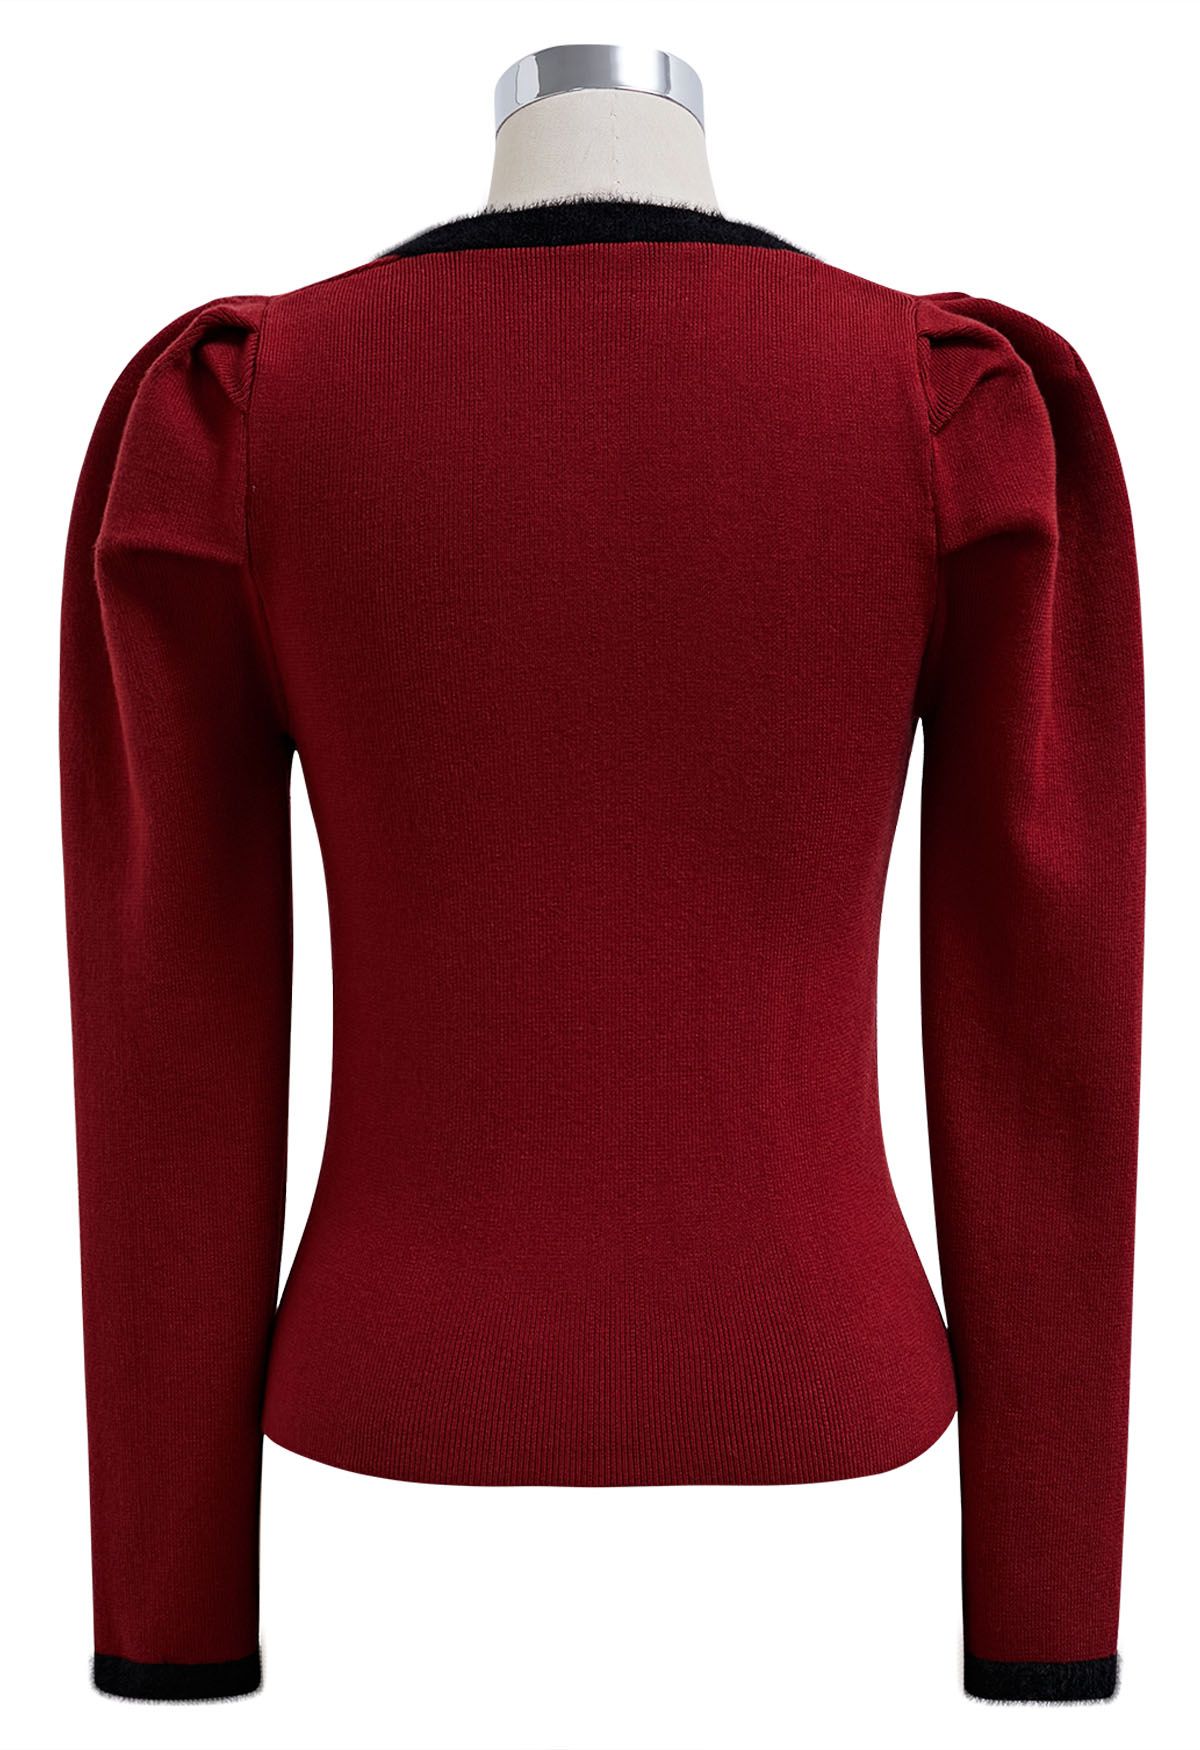 Gigot Sleeve Square Neck Knit Top in Red